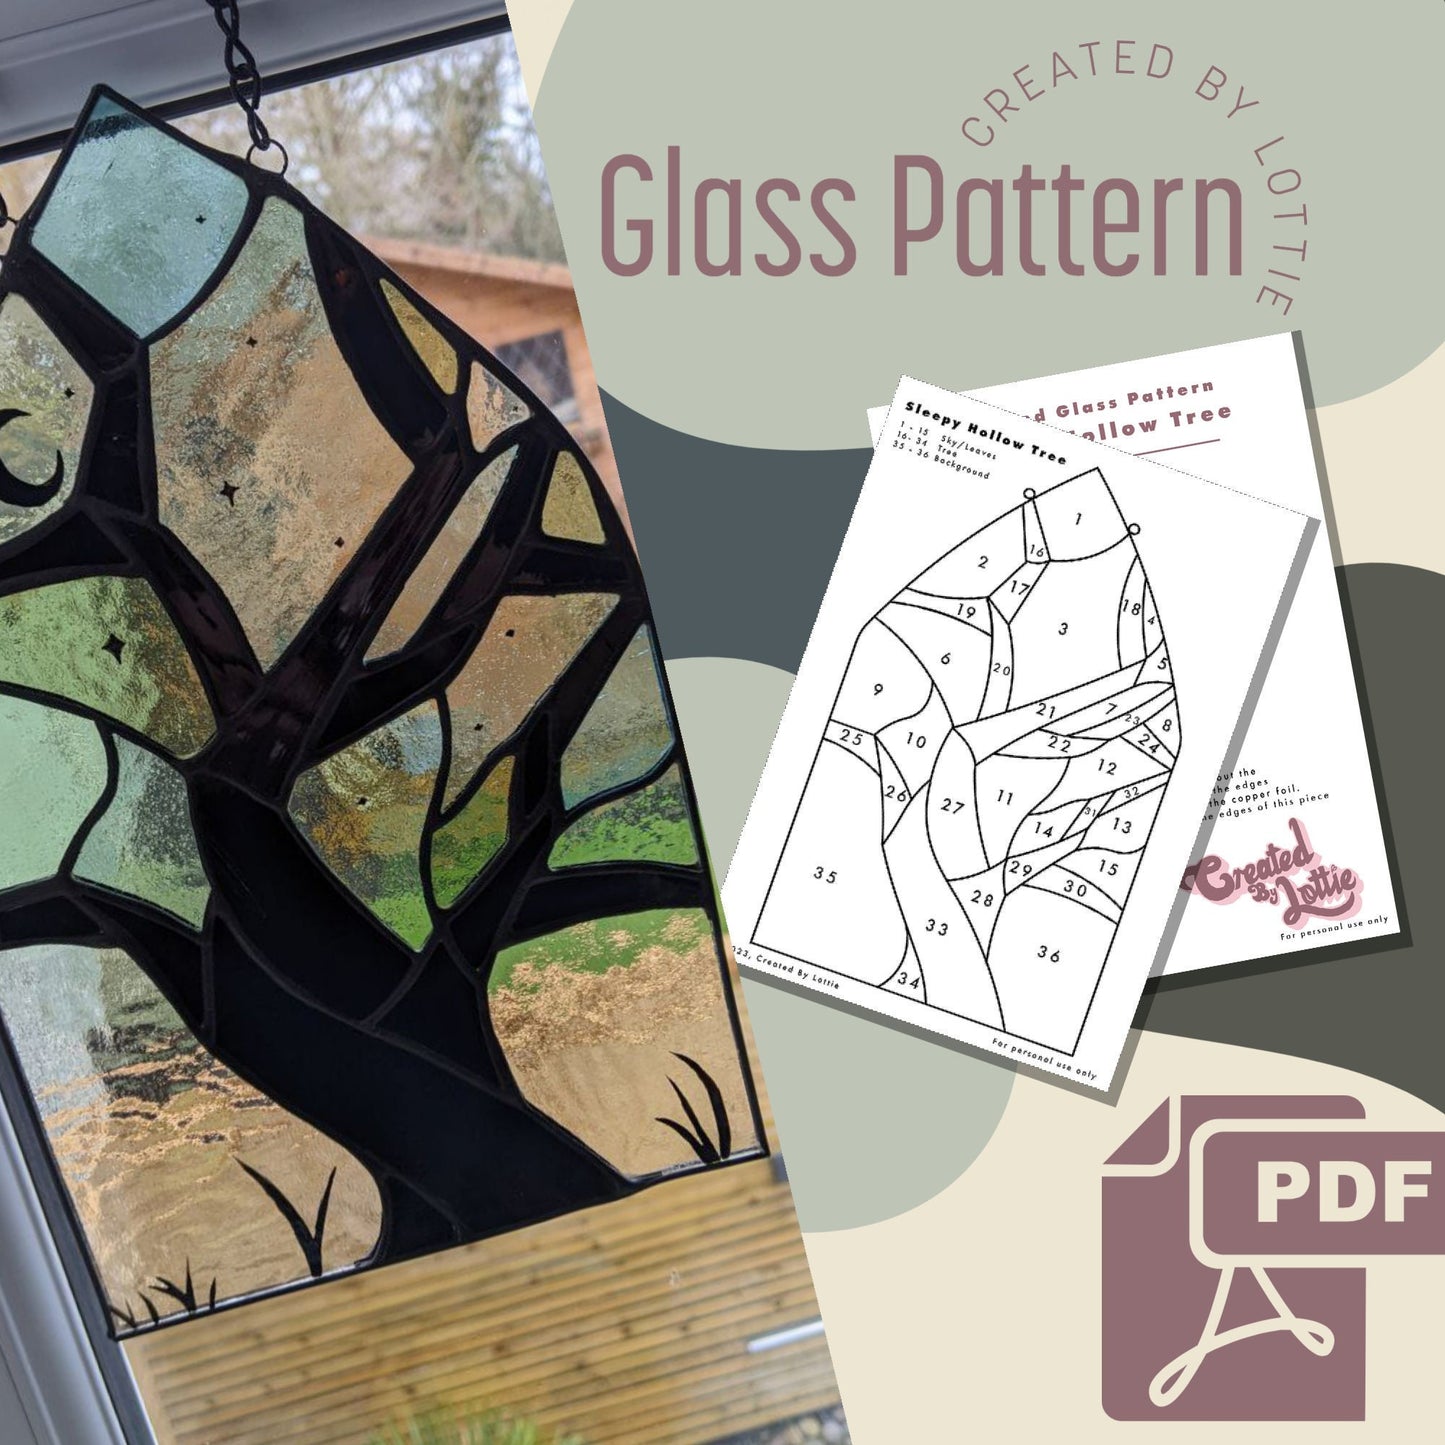 Stained Glass Pattern | PDF | Digital Download | Sleepy Hollow Tree | Cricut Template